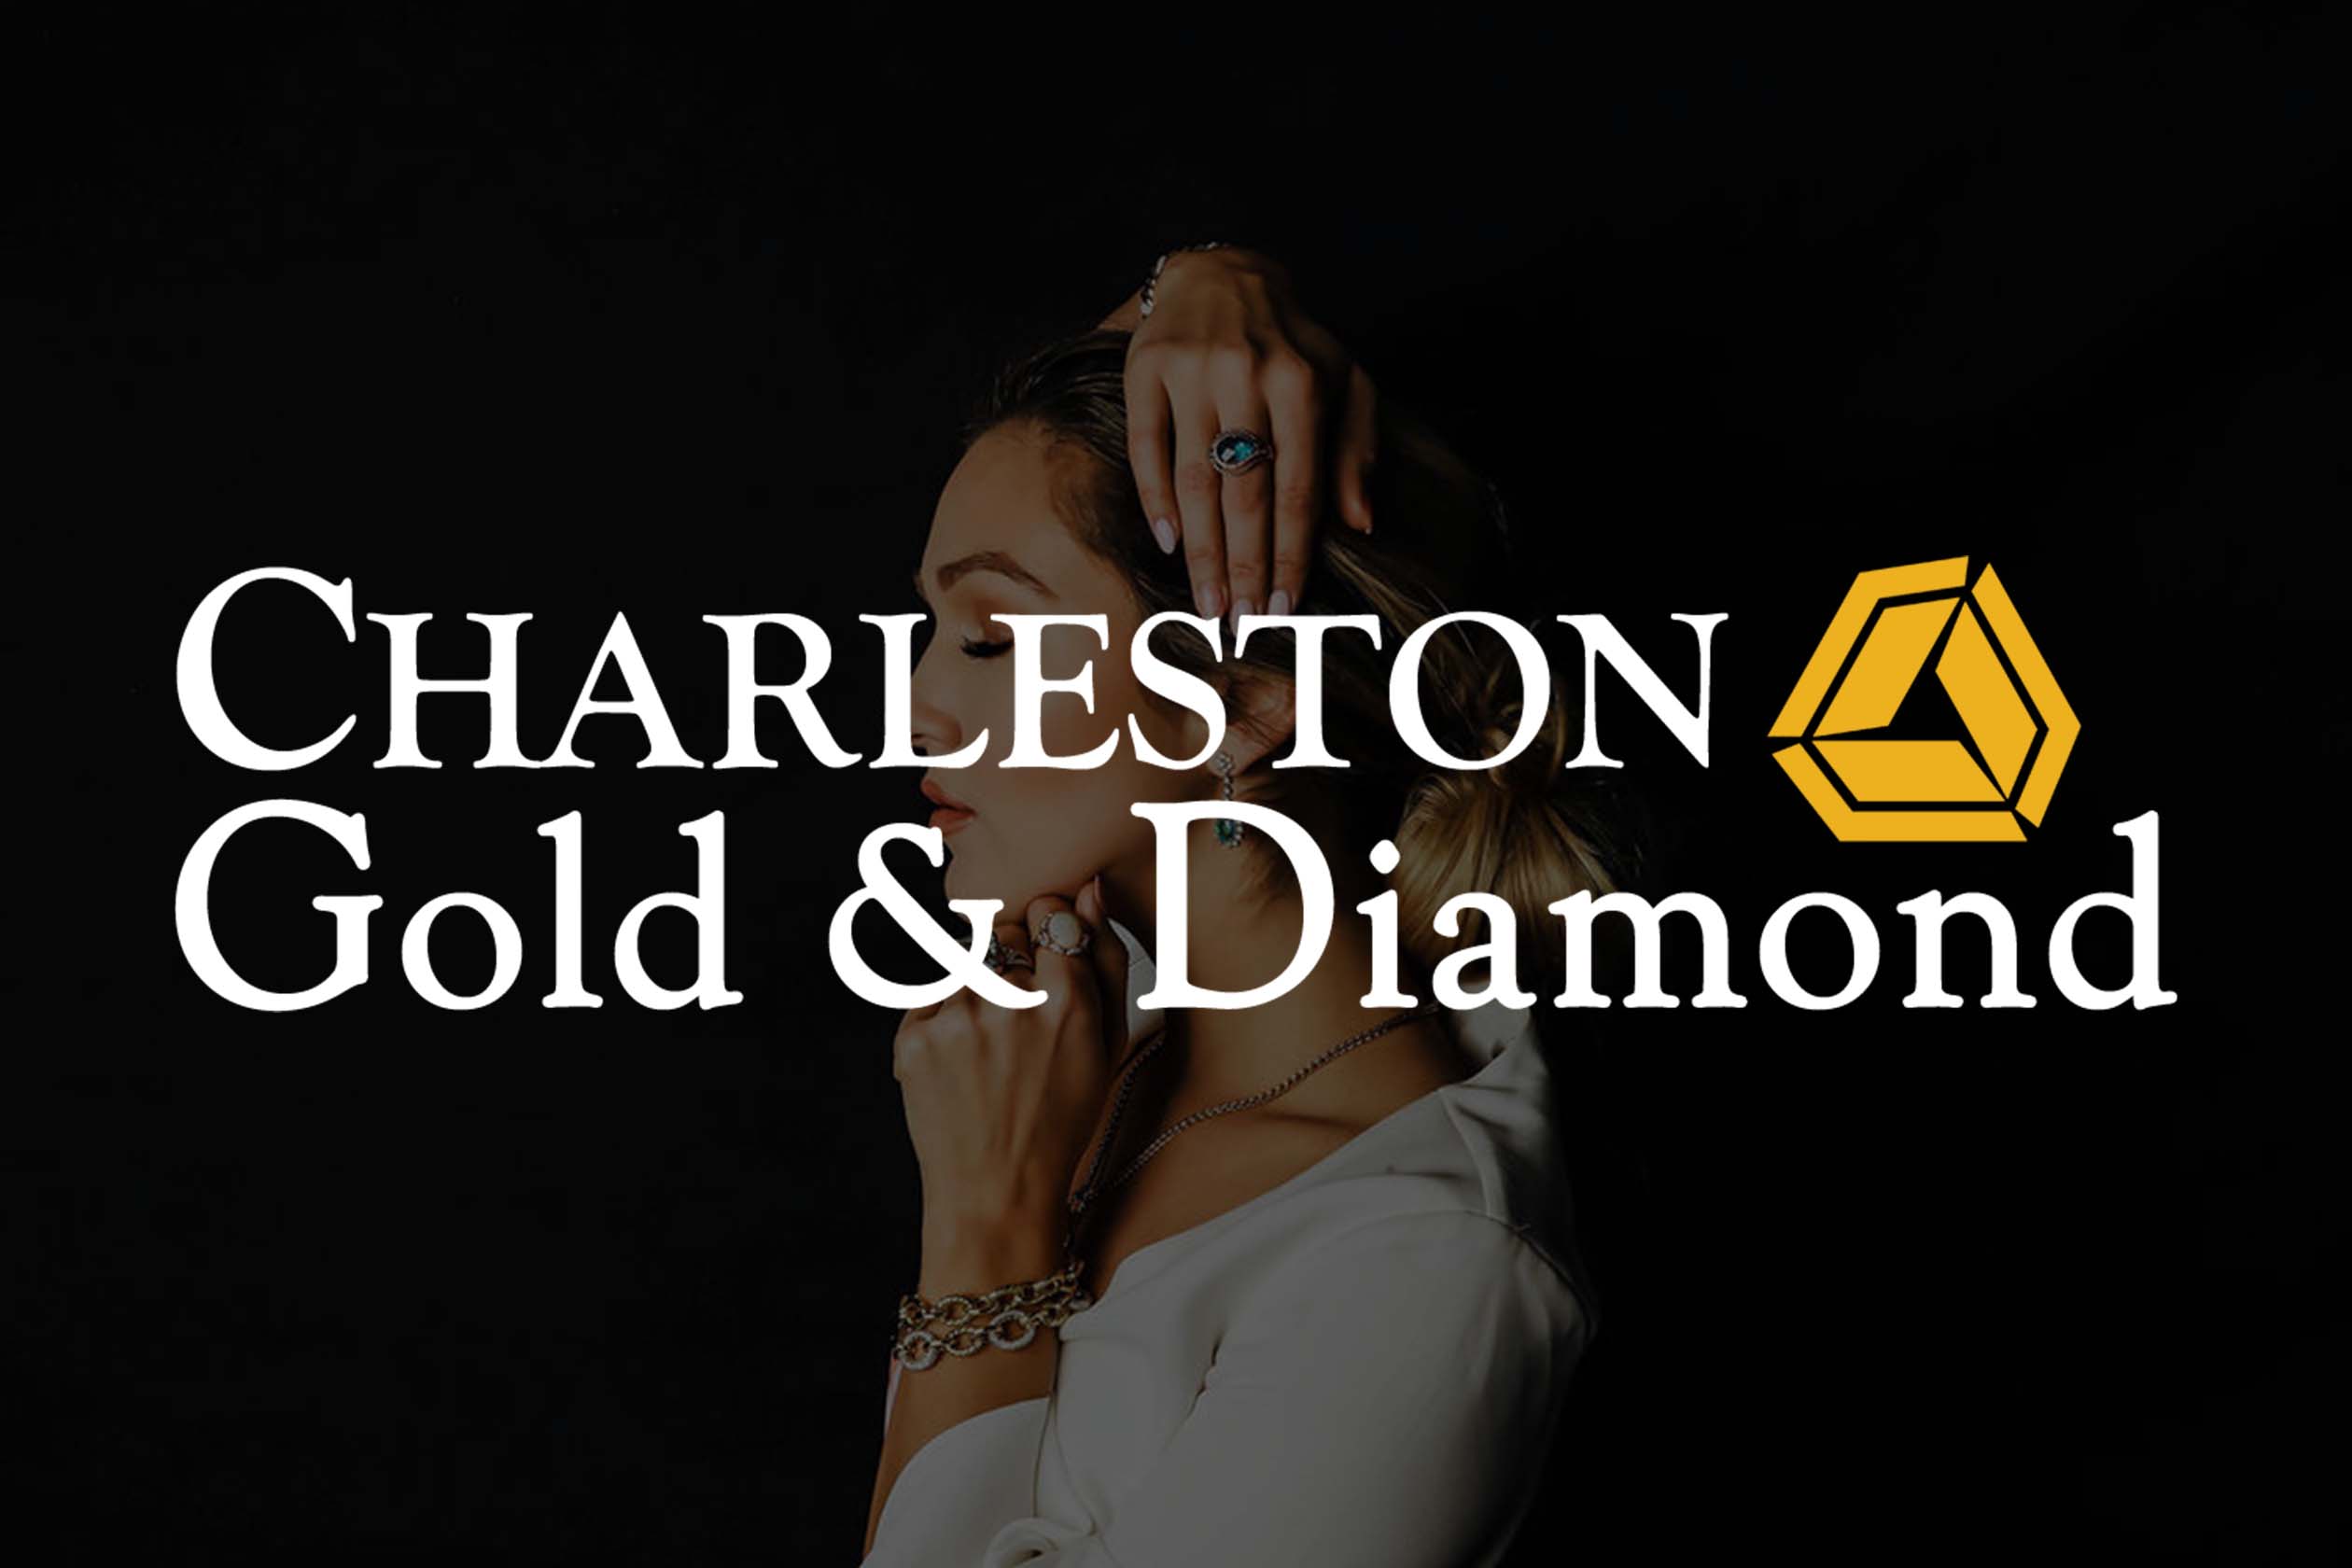 Charleston Gold & Diamond Exchange has been the marketplace for authenticated luxury fine jewelry and watches for nearly 20 years. They buy, sell and trade jewelry, coins and bars, fine watches, diamonds, and more.